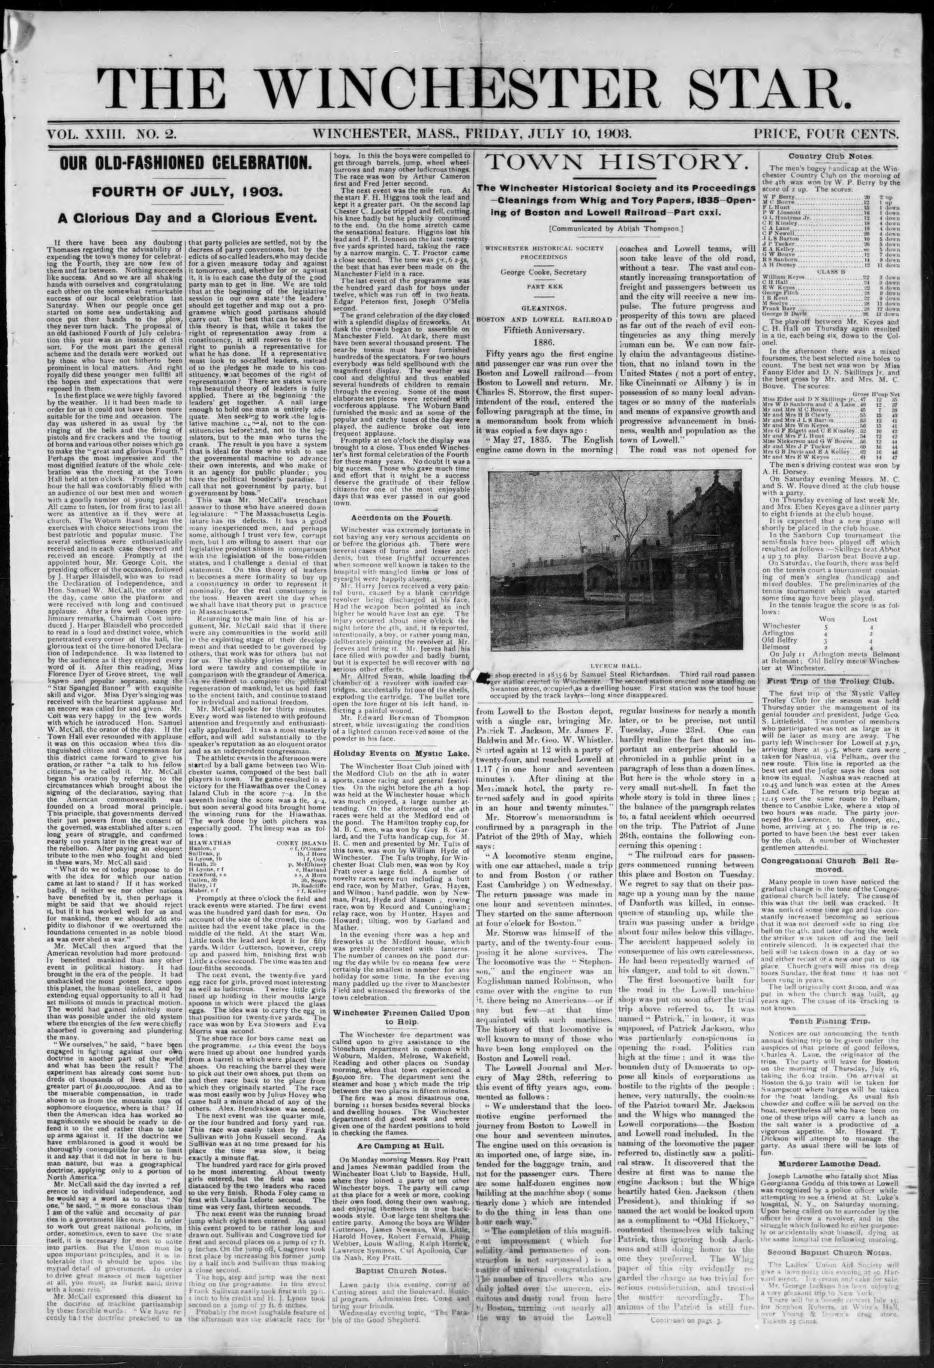 Feliciana sentinel. [volume] (St. Francisville, La.) 1877-1892, December  01, 1877, Image 1 « Chronicling America « Library of Congress